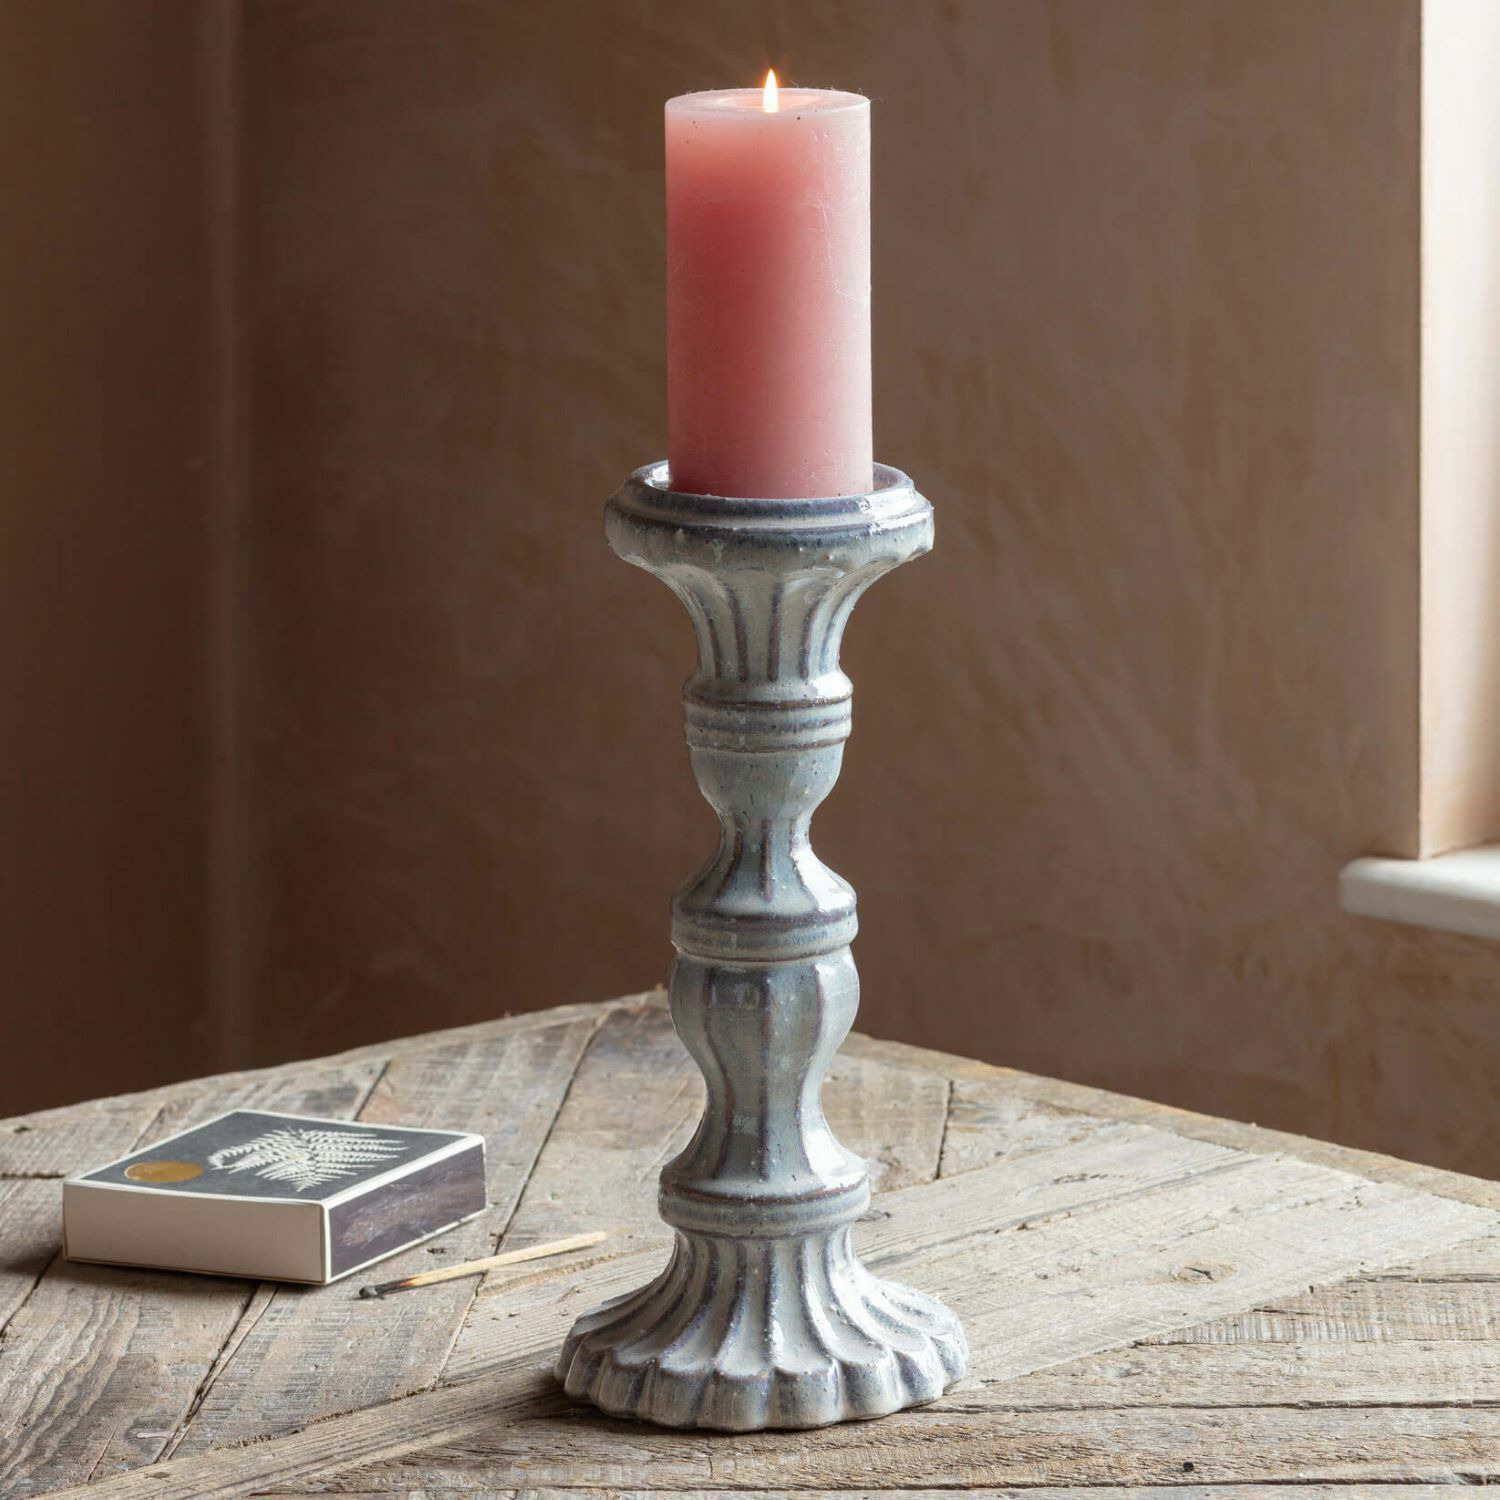 Graham and Green Ornate Pillar Candle Holder - image 1